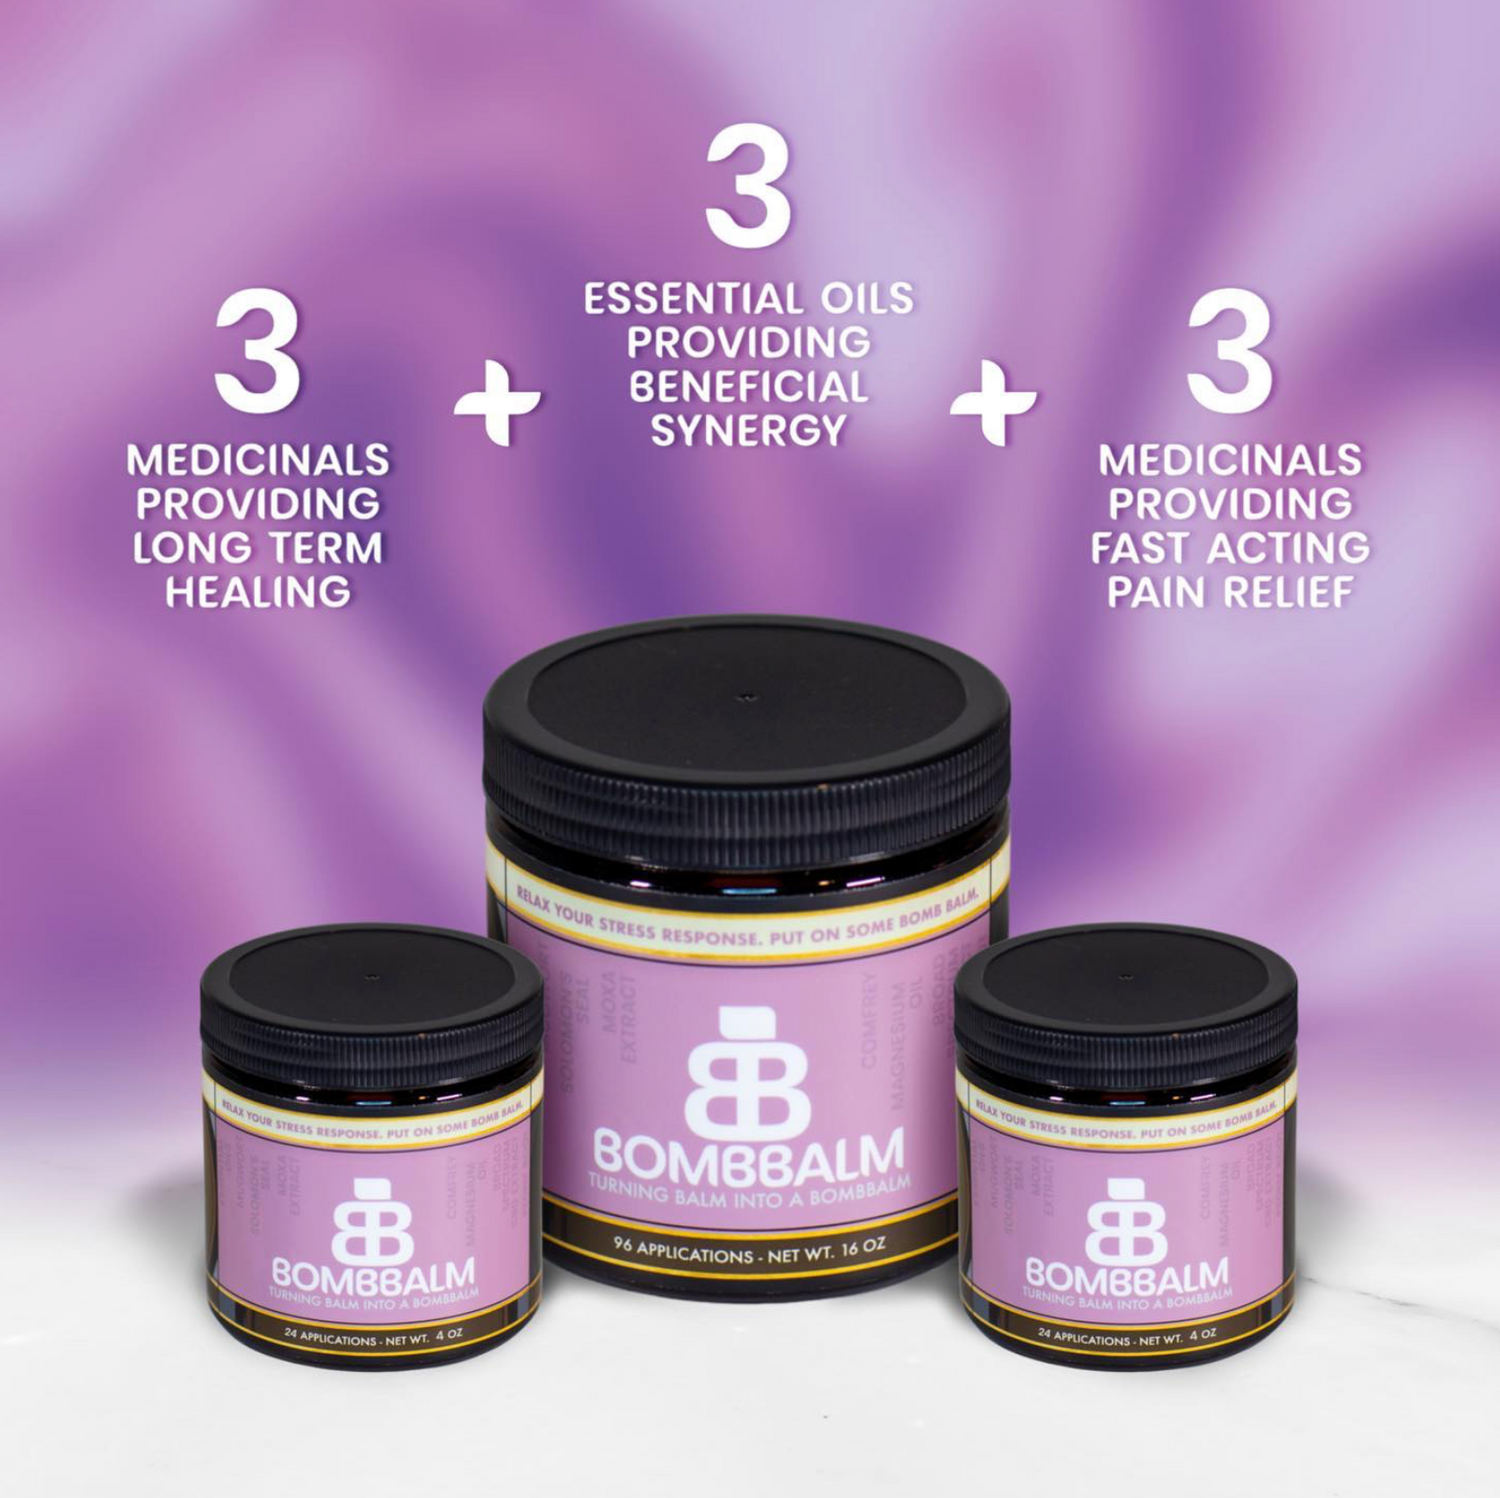 BombBalm Super Salve From LALAS Wellness Is Now Available To All